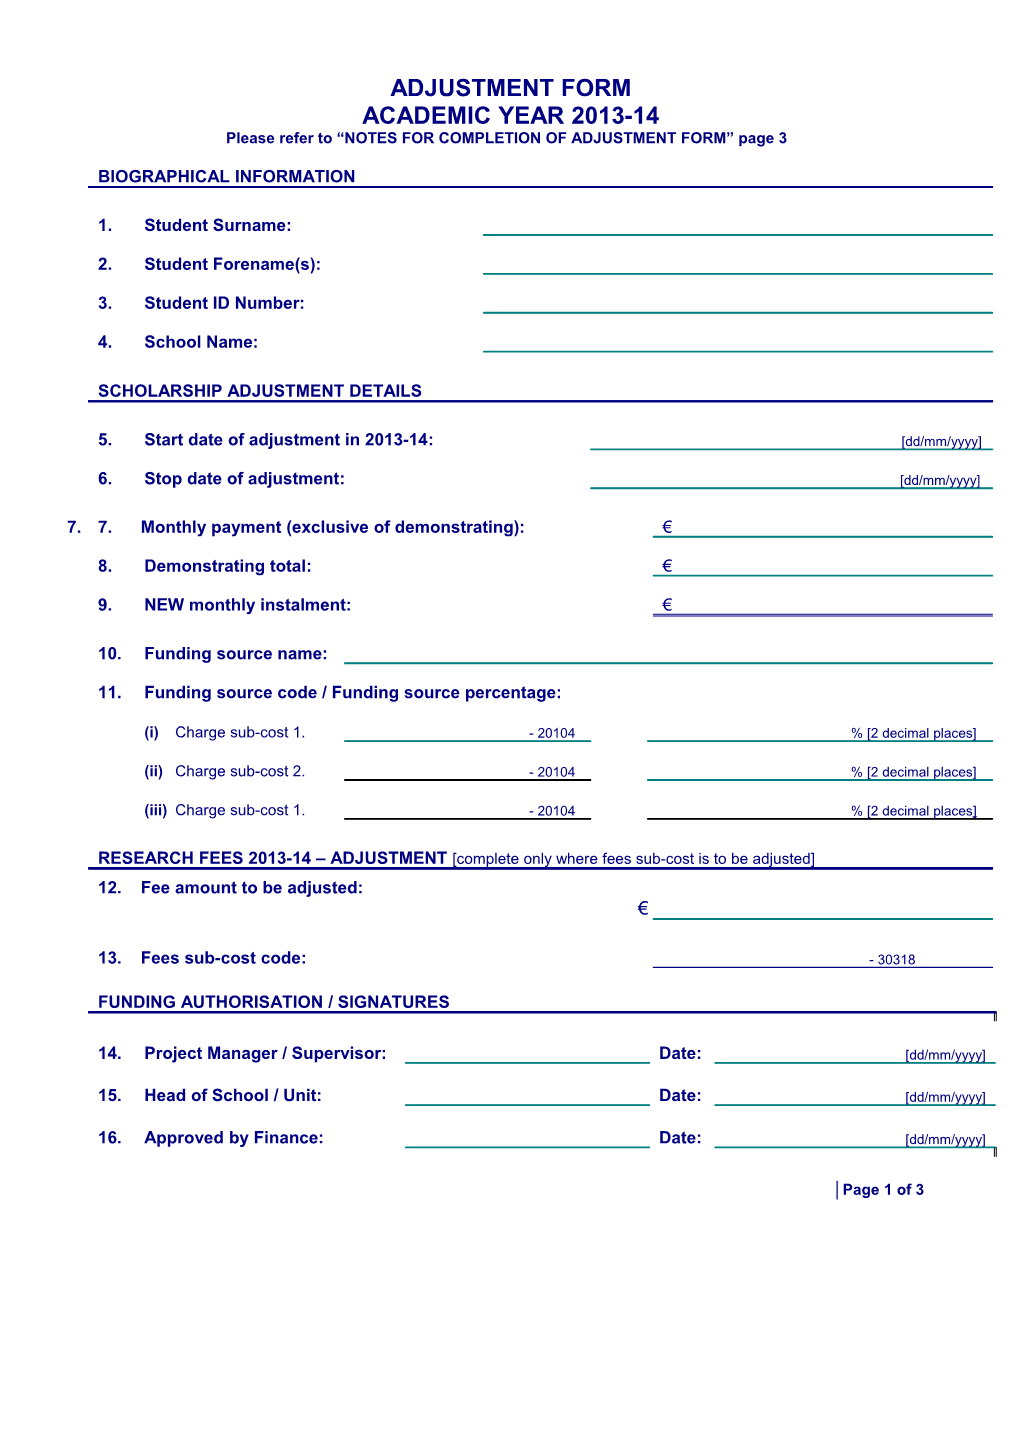 Please Refer to NOTES for COMPLETION of ADJUSTMENT FORM Page 3